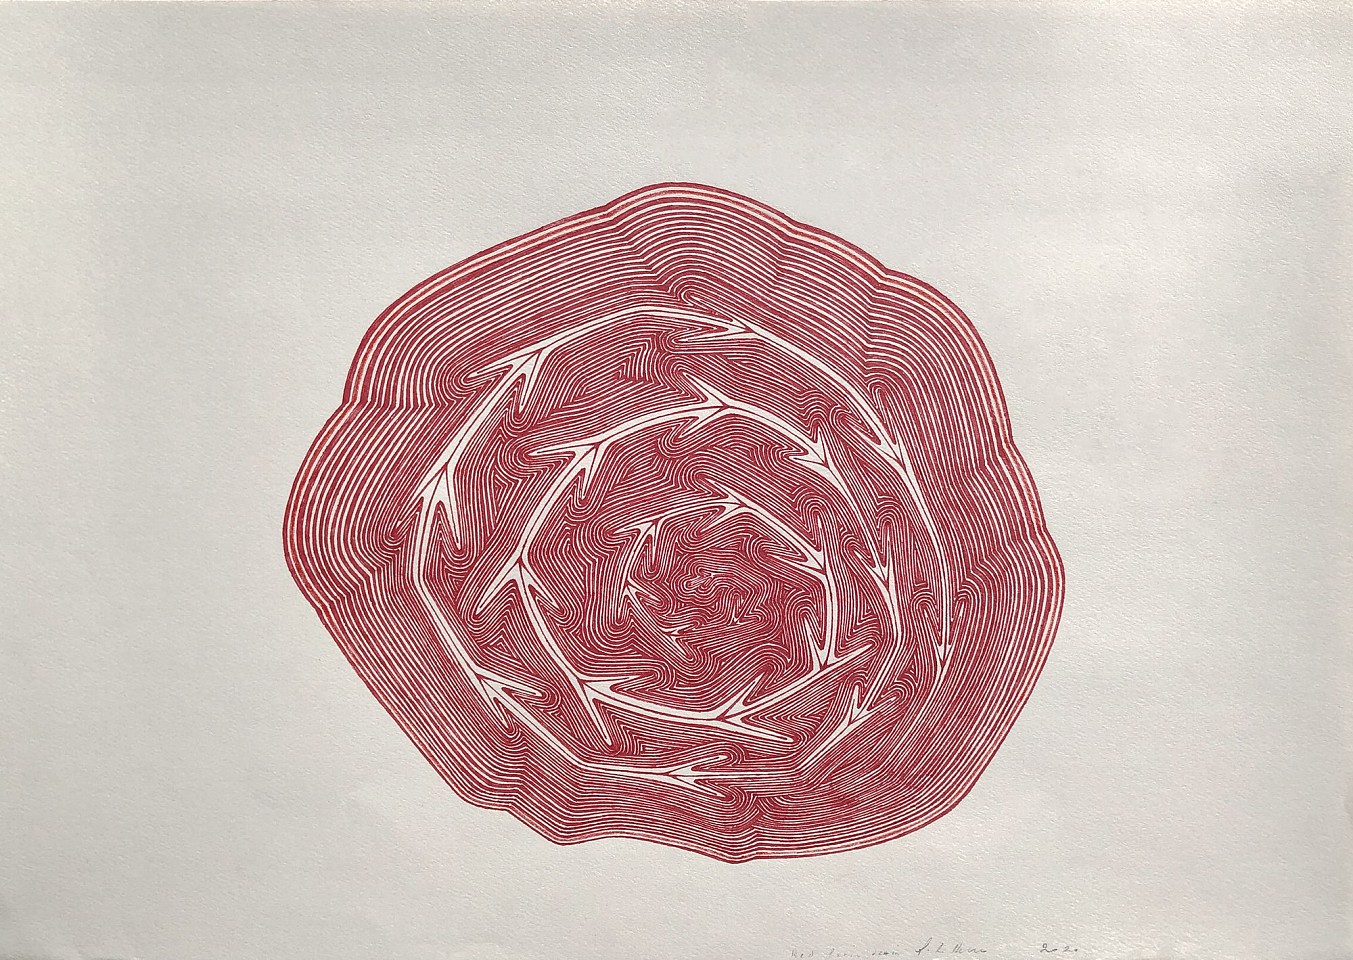 Stewart Helm, Red Brain, 2020
Red ink on paper, 14.875"x 20.5"
SH-641
Price Upon Request